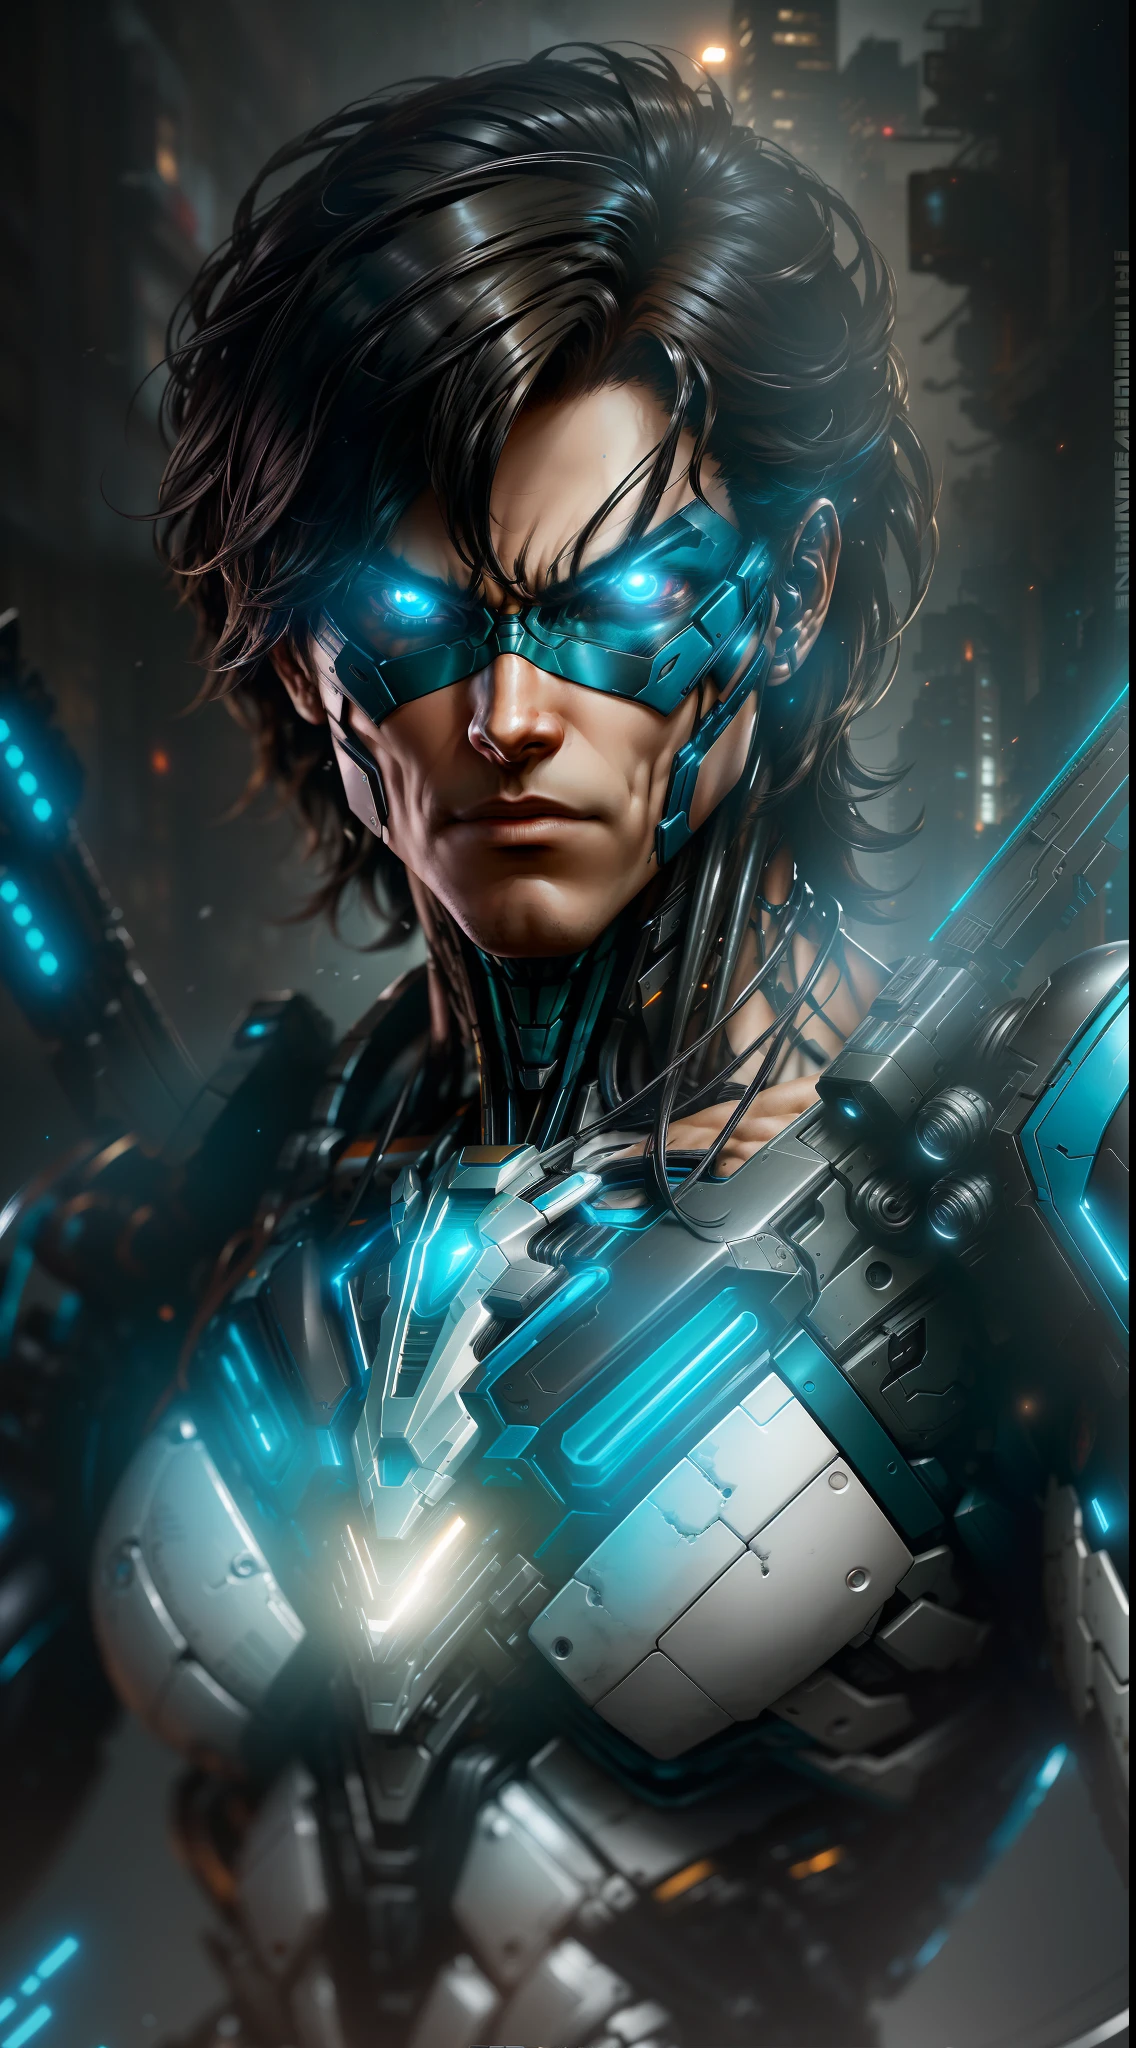 Nightwing from DC photography, biomechanical, complex robot, full growth, hyper-realistic, insane small details, extremely clean lines, cyberpunk aesthetic, a masterpiece featured on Zbrush Central